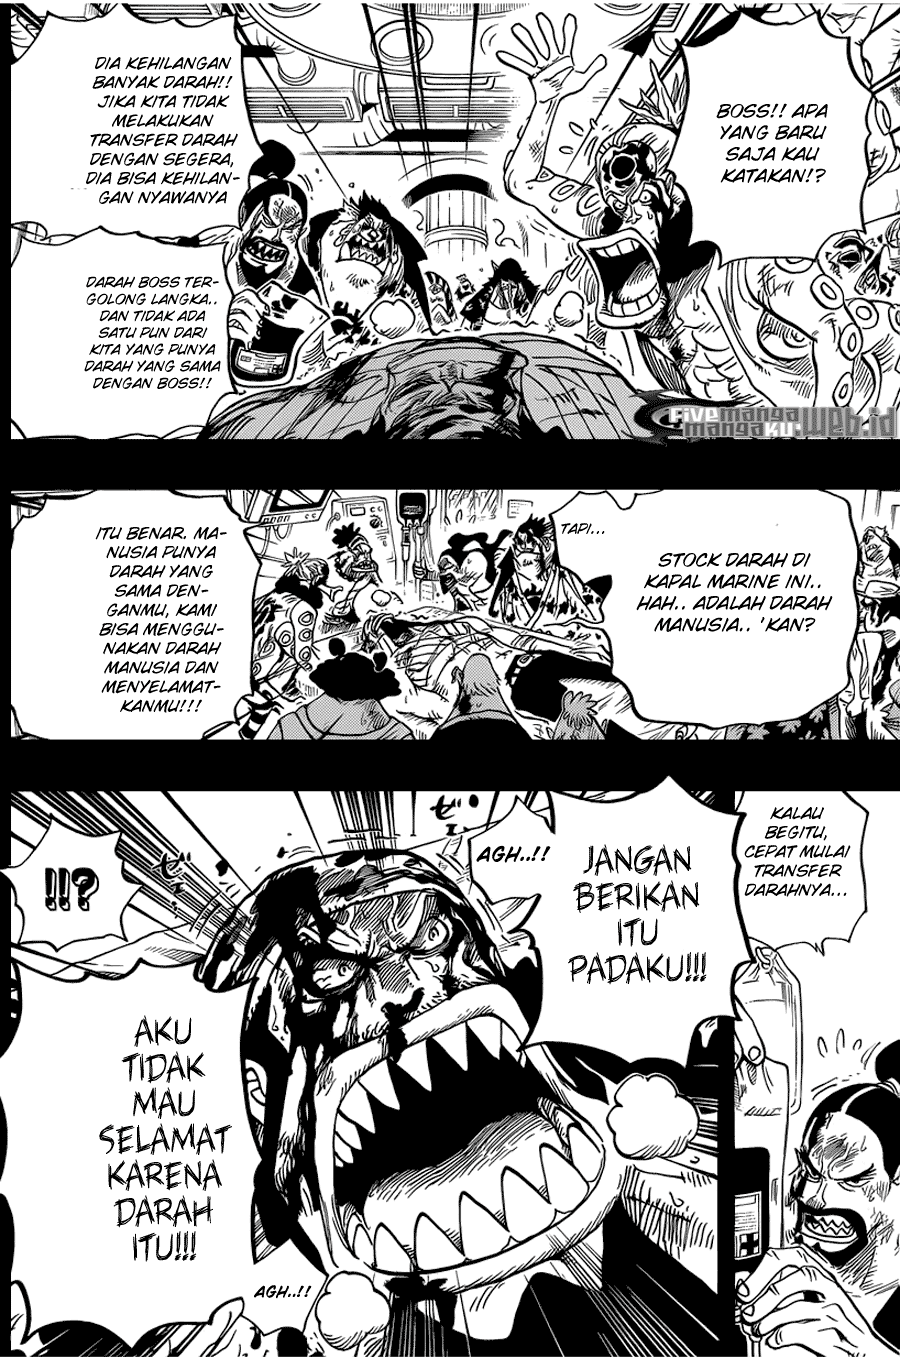 One Piece Chapter 623 – si bajak laut fisher tiger Image 13